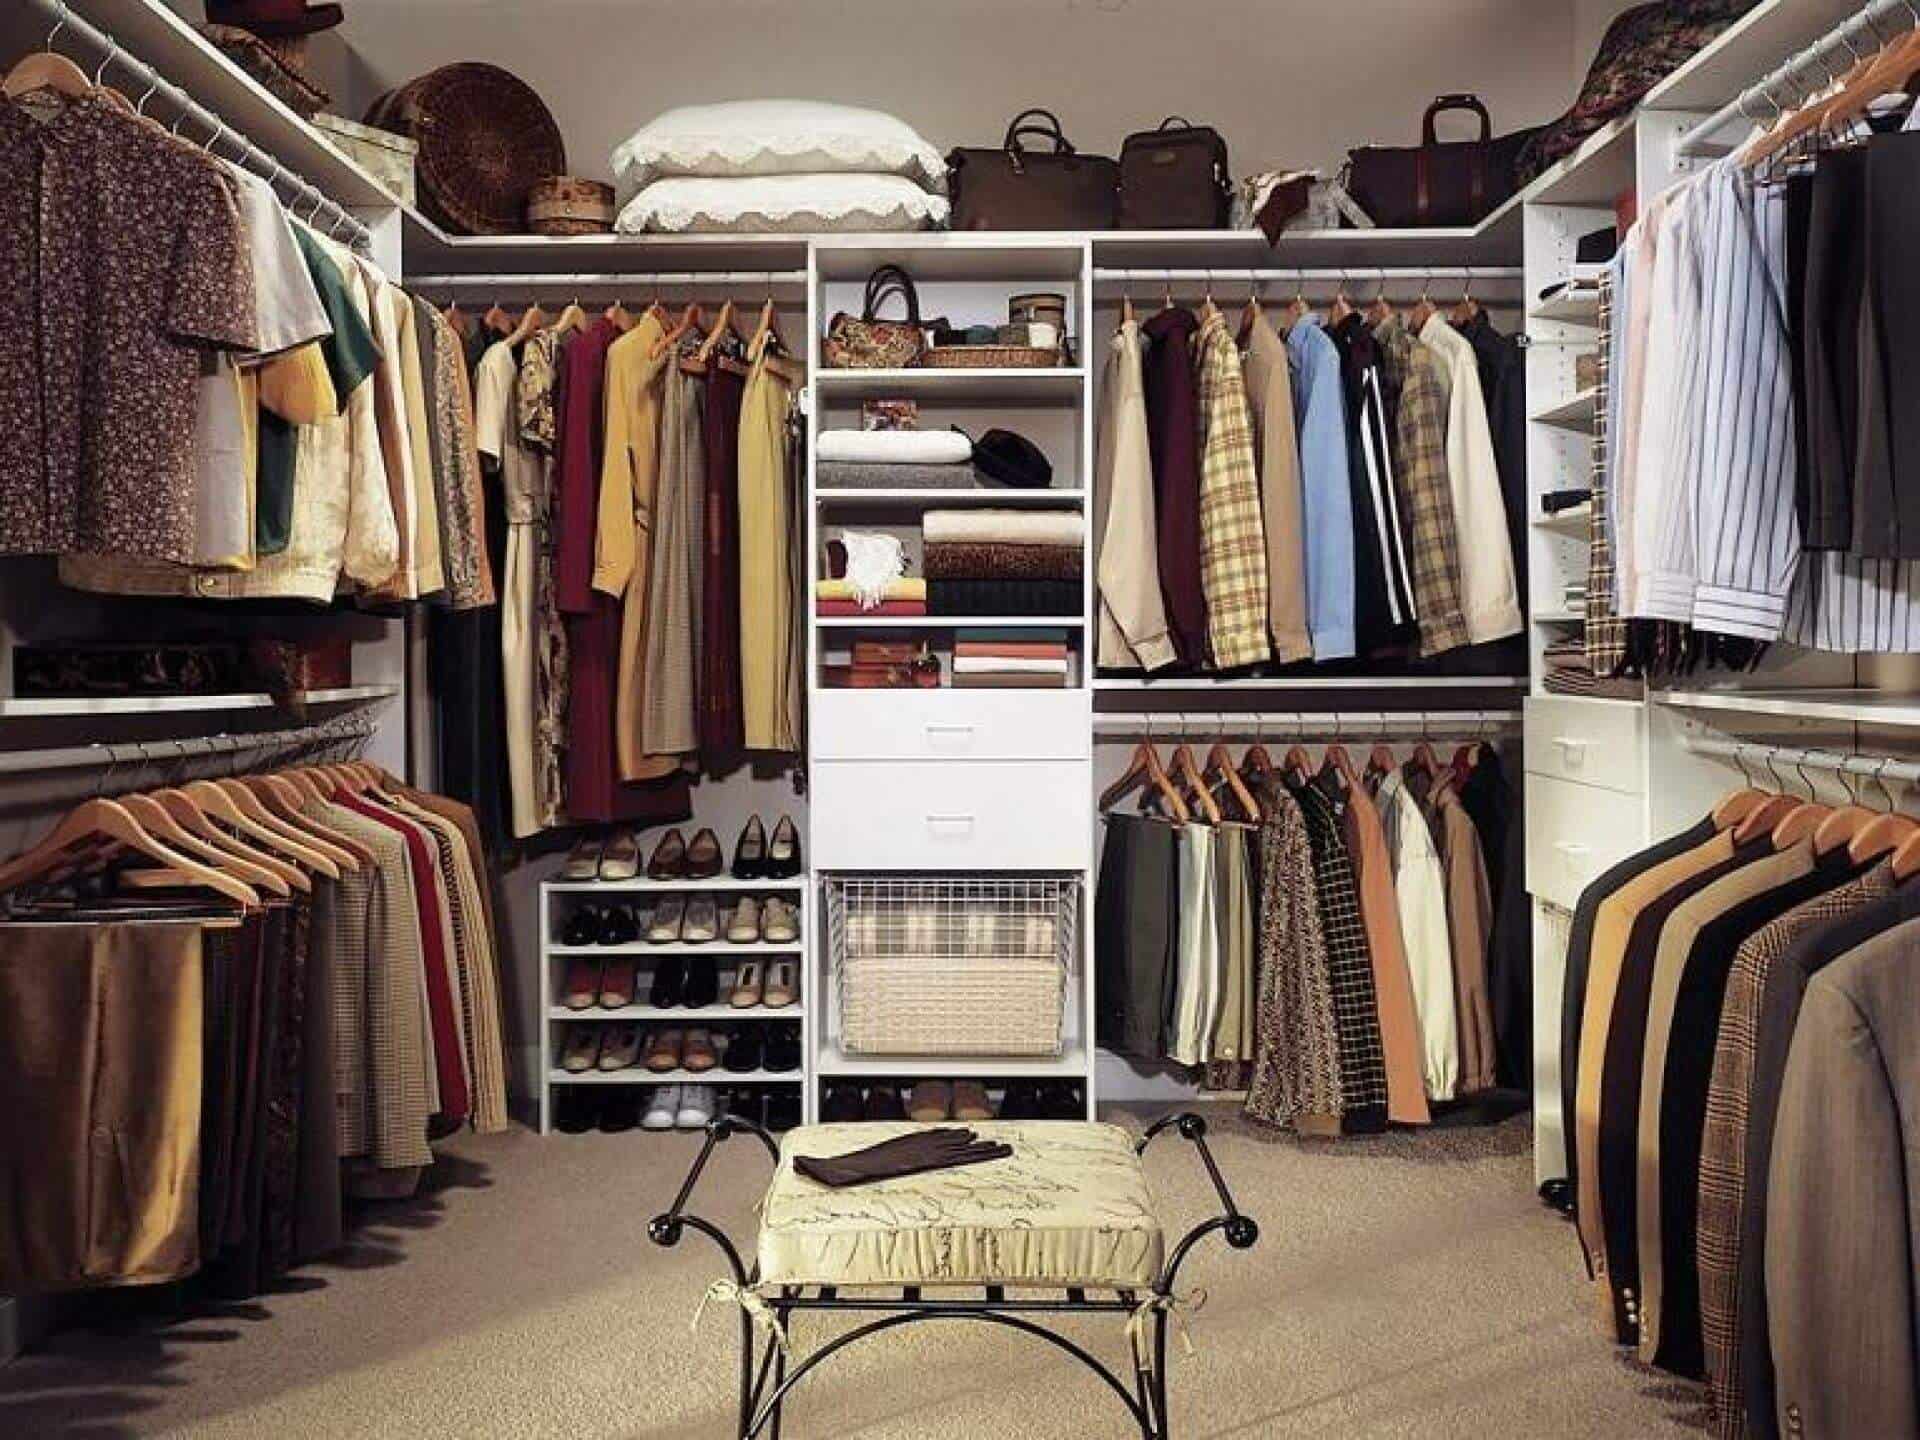 15 Contemporary Walk In Closet Designs That Maximize Space And Style